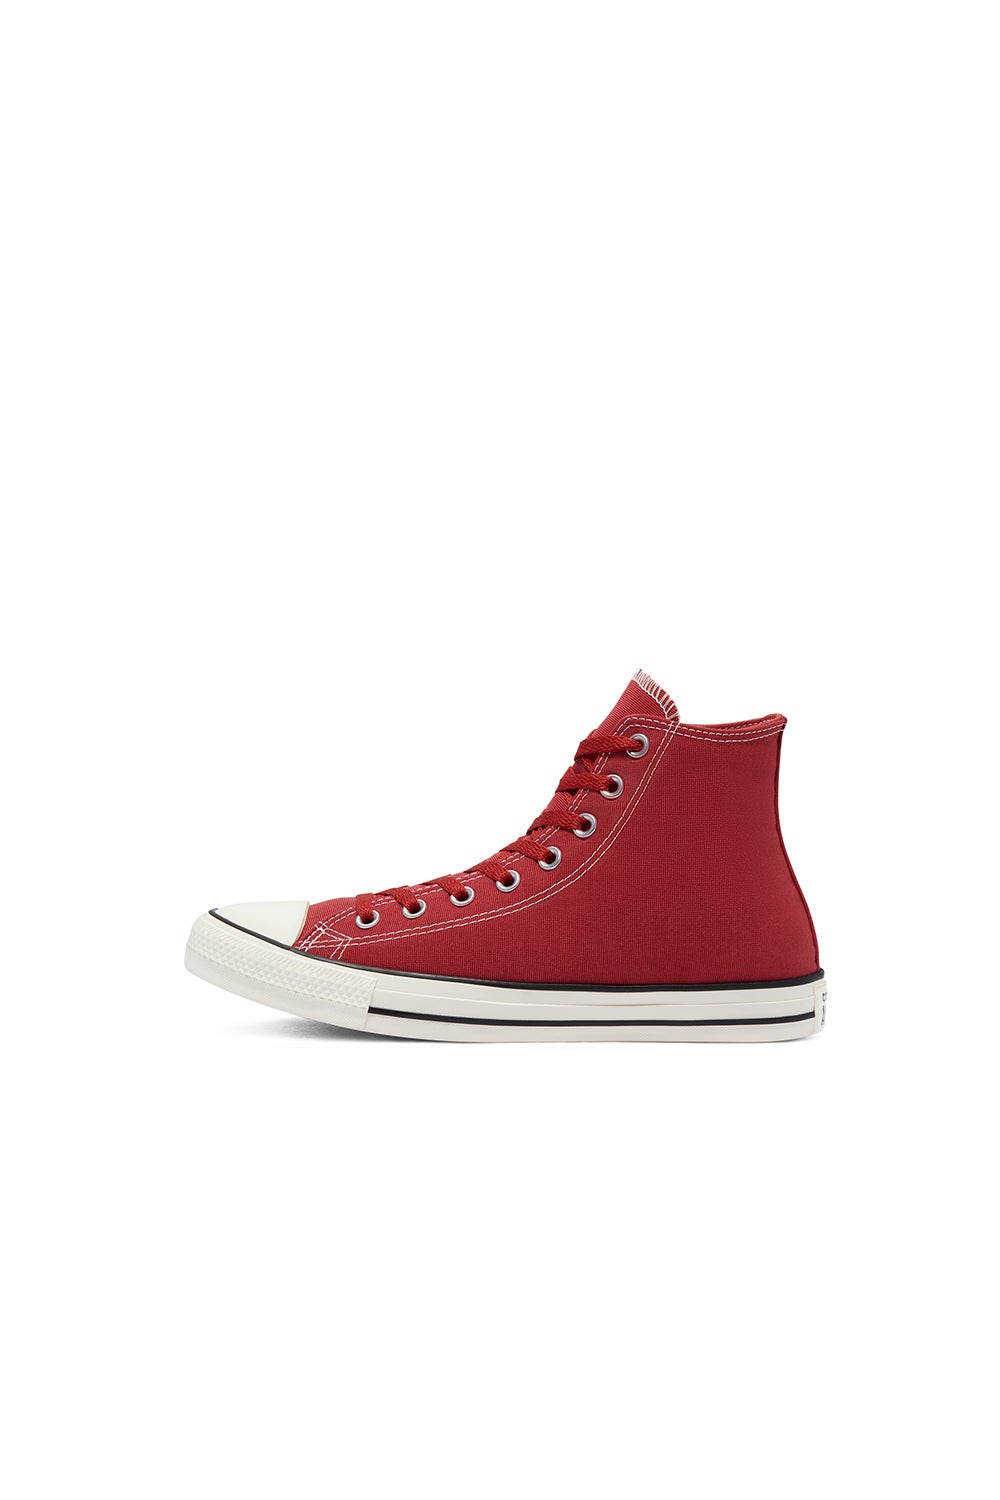 Converse Chuck Taylor All Star National Parks Patch High Top Claret Red